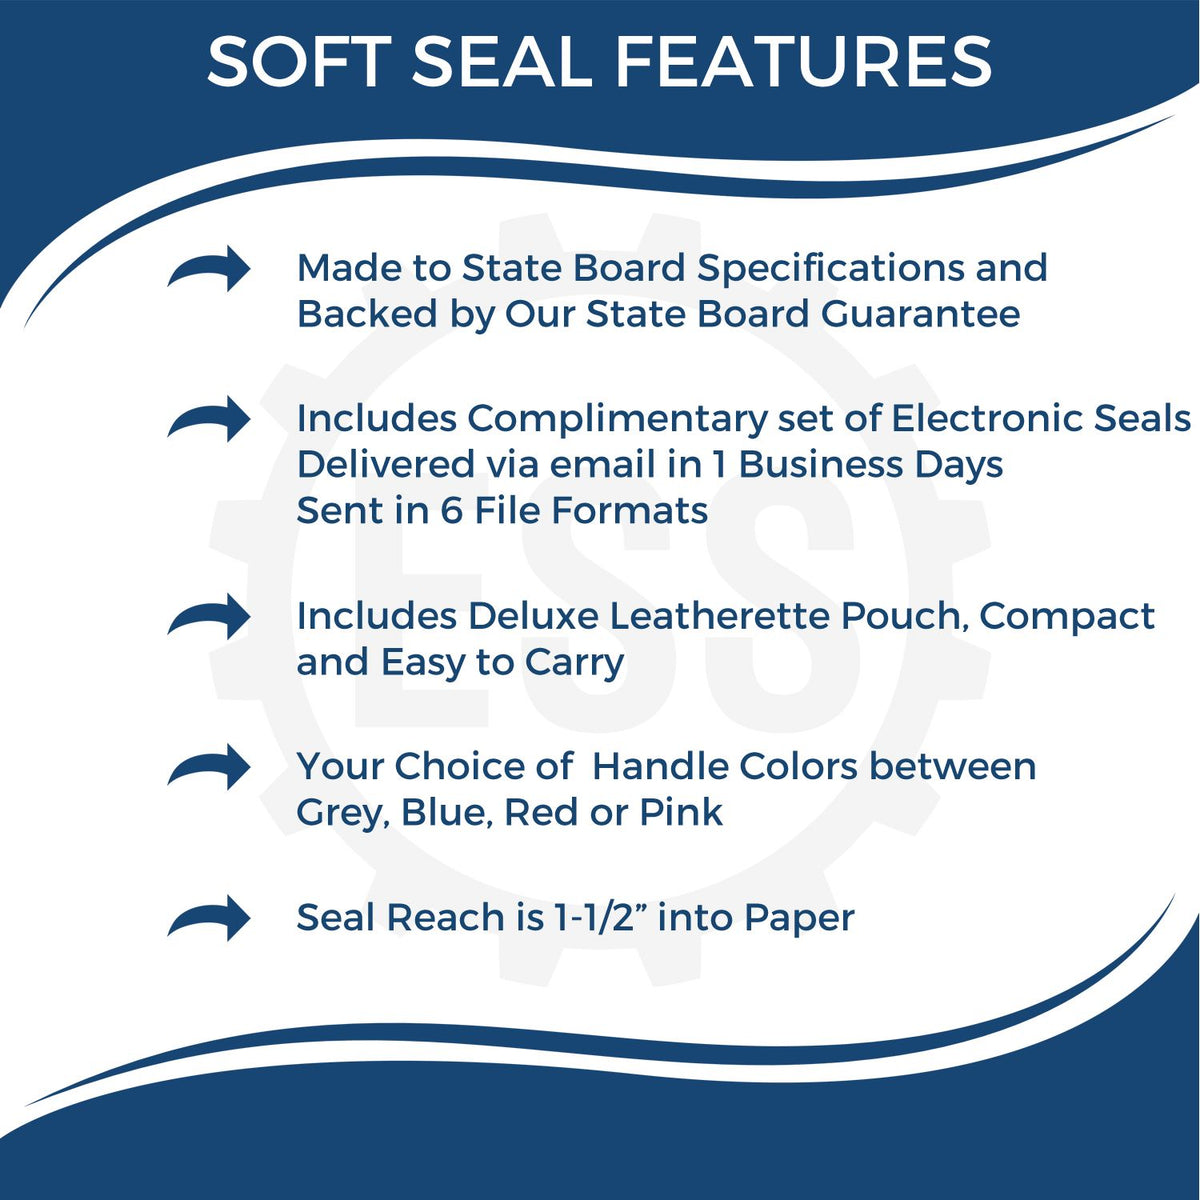 A picture of an infographic highlighting the selling points for the Soft Hawaii Professional Geologist Seal